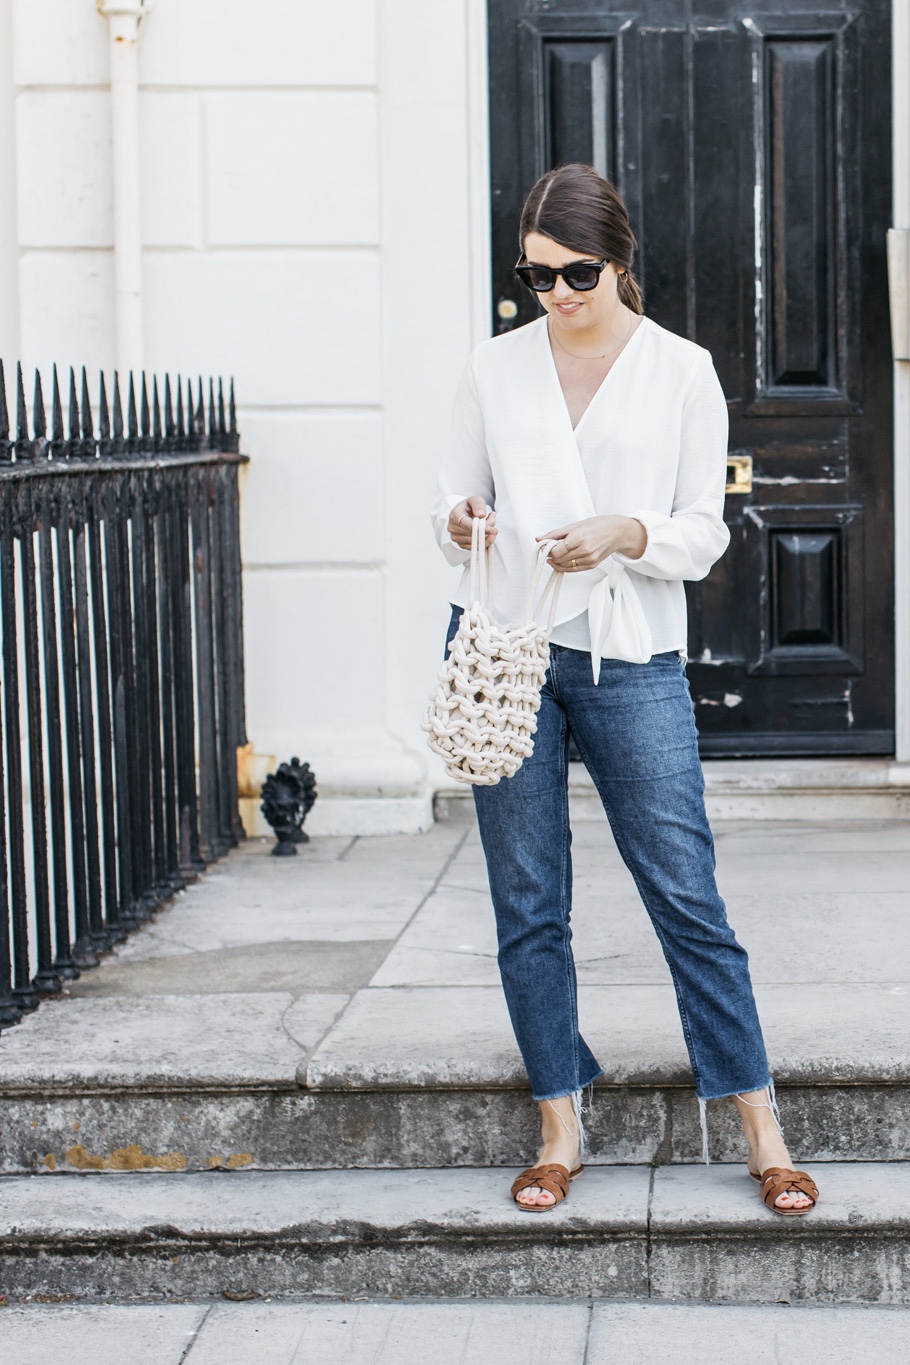 How To Make A Solid Fancy Bag Purchase – The Anna Edit